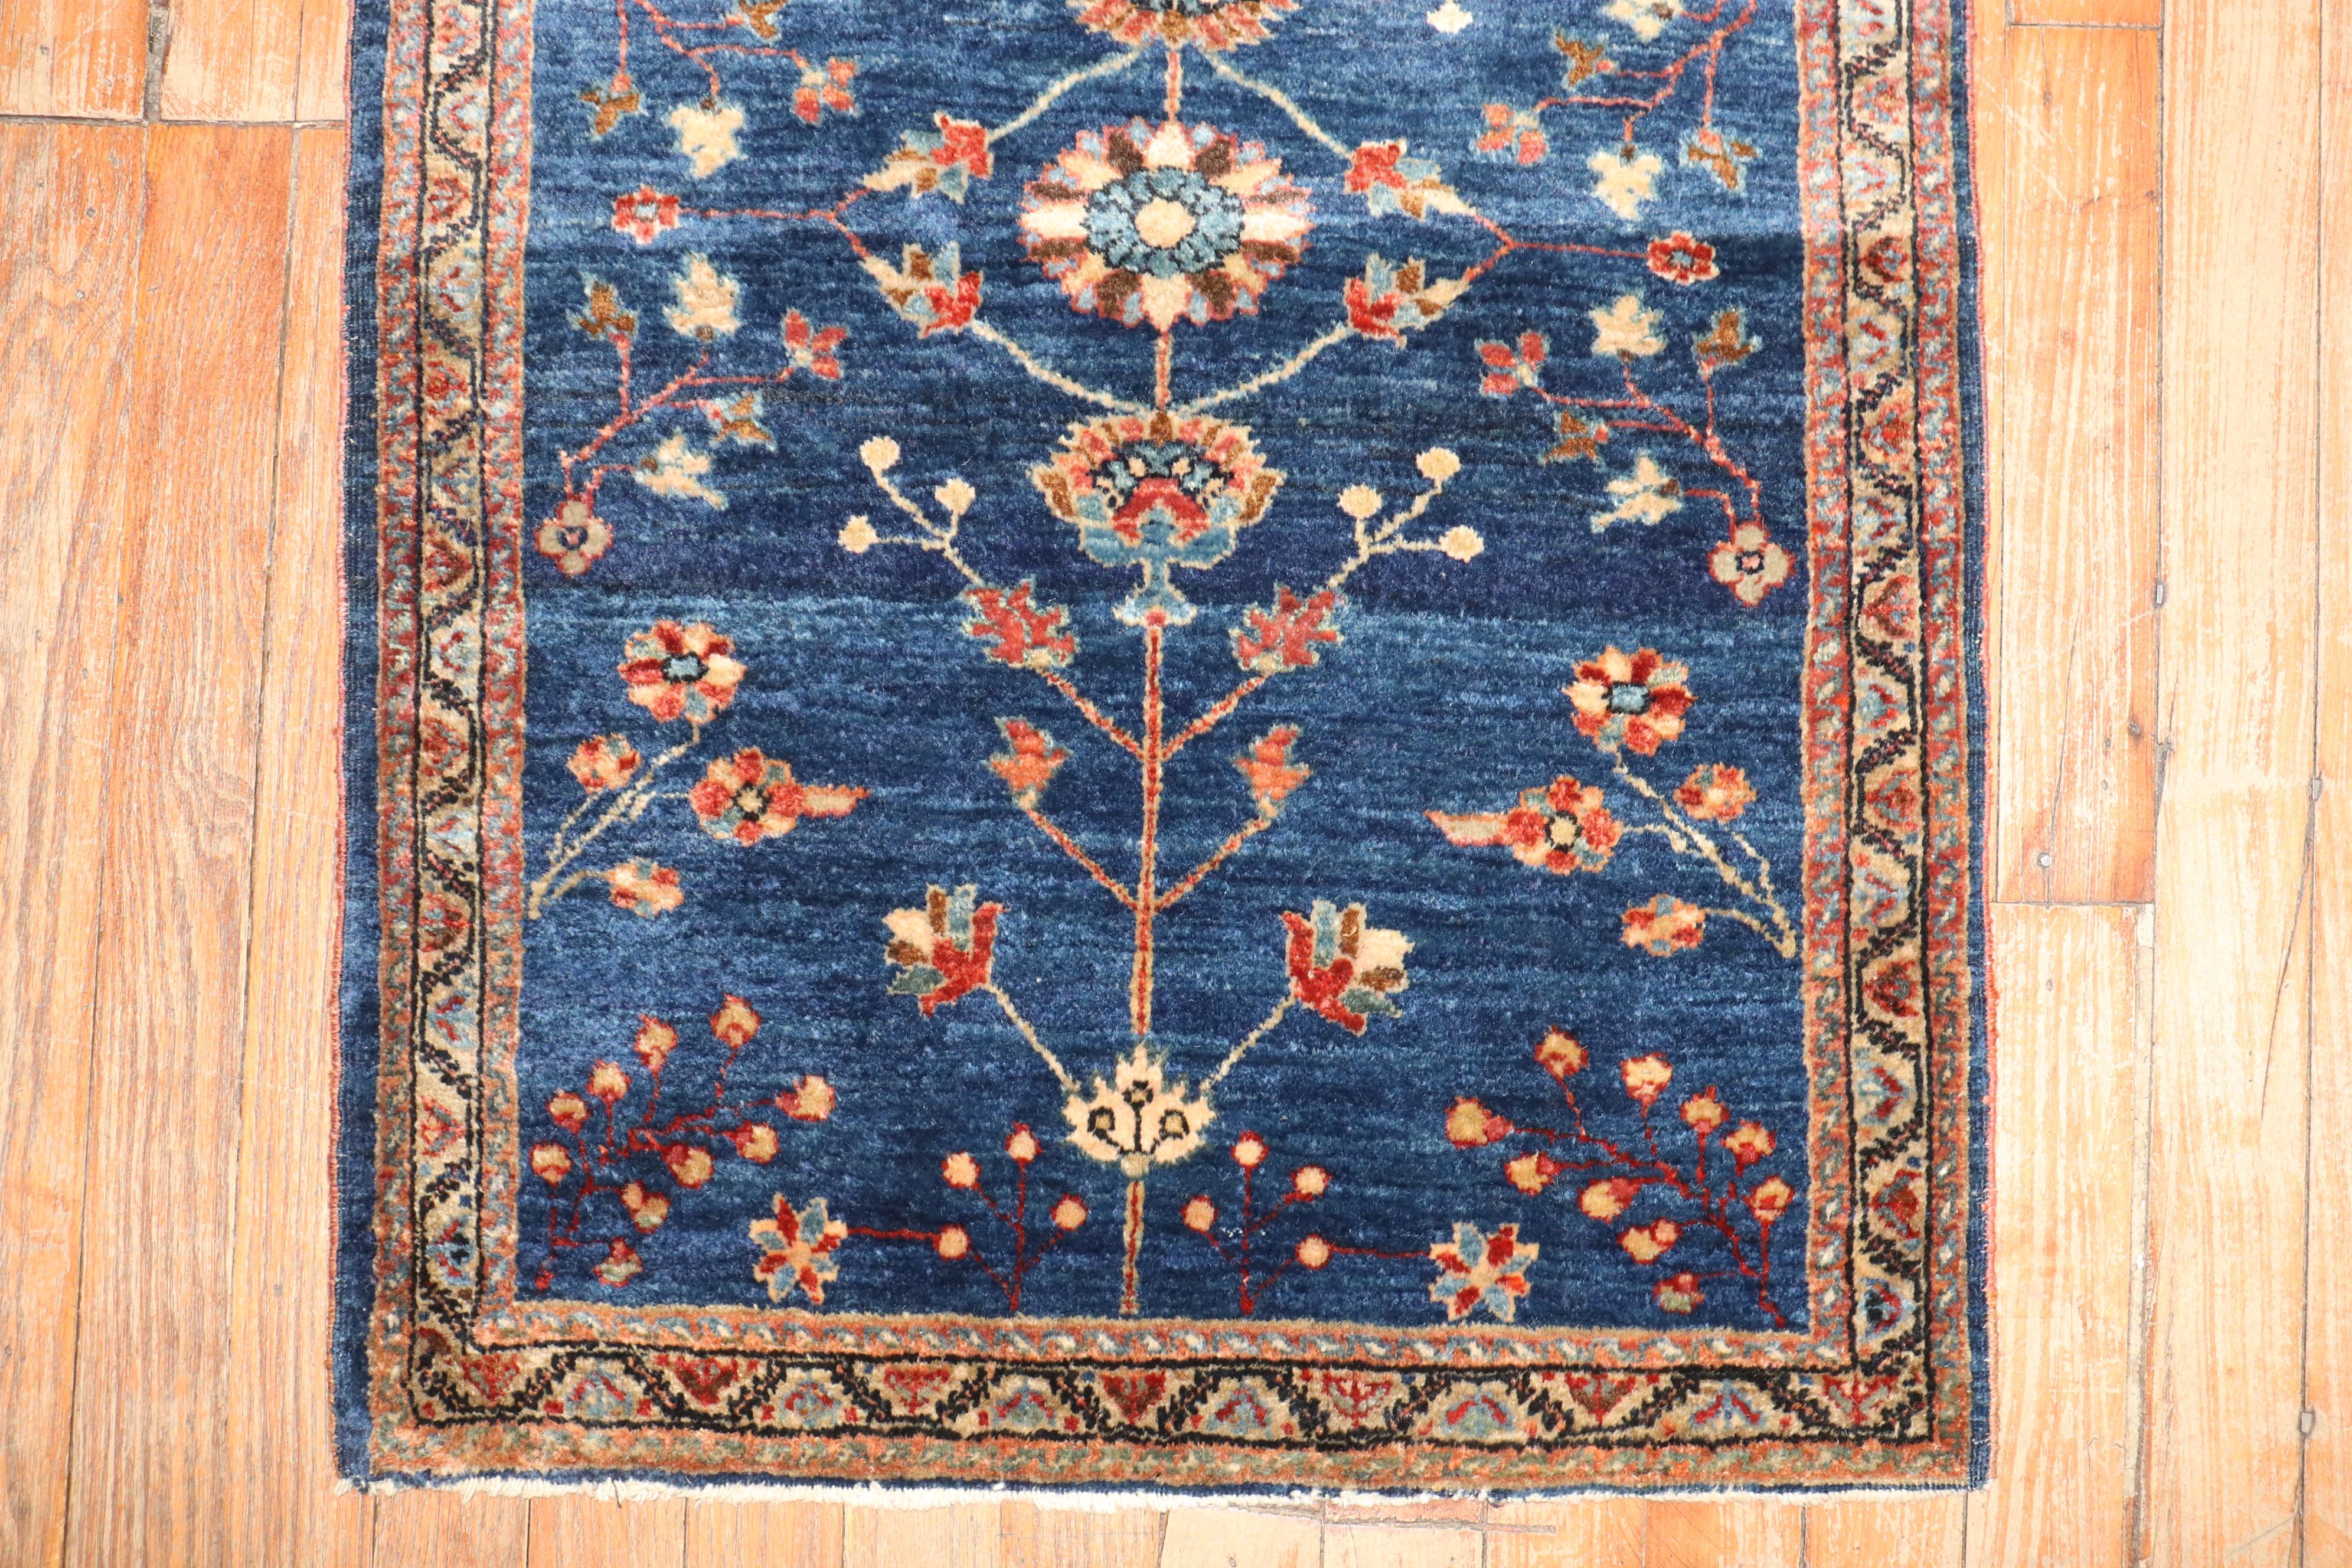 An authentic early 20th-century scatter size Persian Sarouk carpet in predominantly navy

Measures: 2 x 2'11